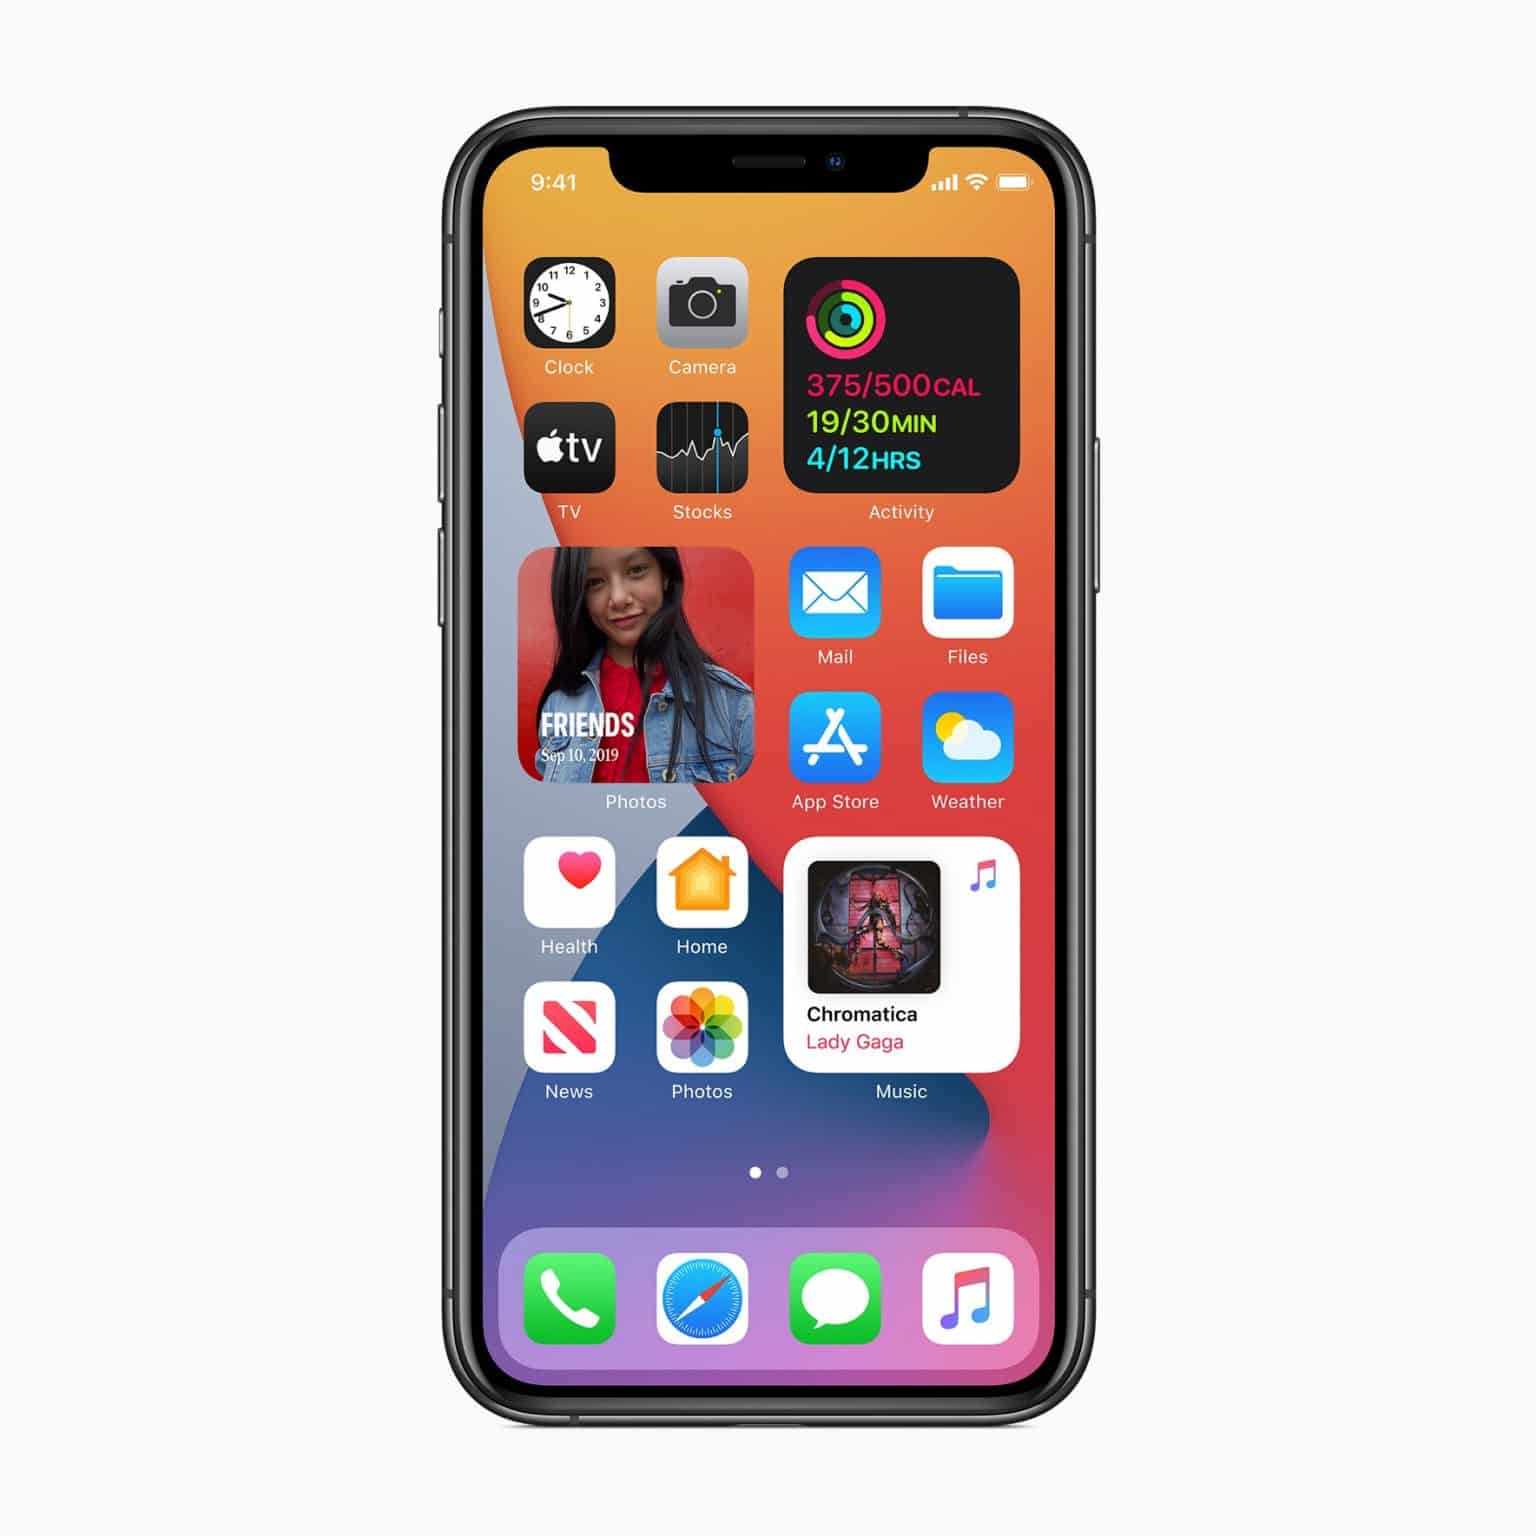 Apple reveals iOS 14 -- here's what's new